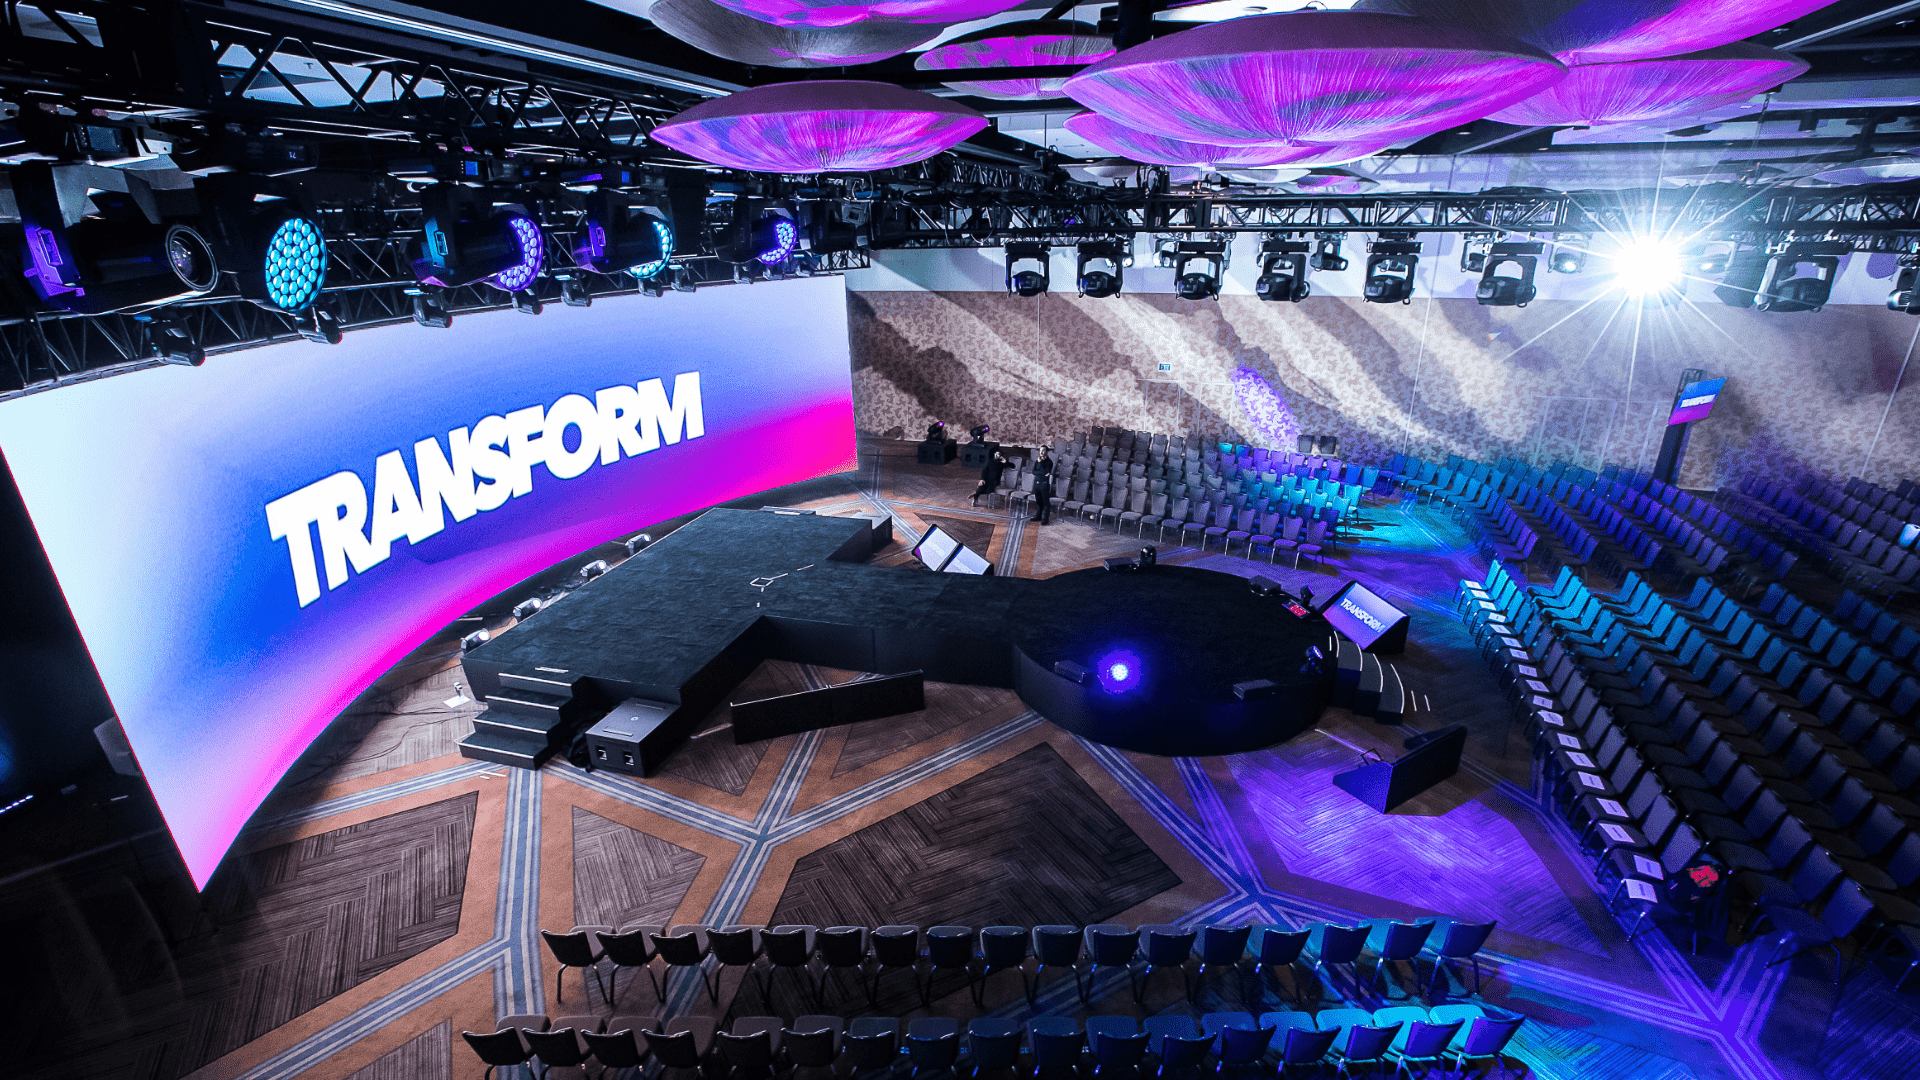 Event stage design for a Transform live event with a large curved screen and blue and purple lighting